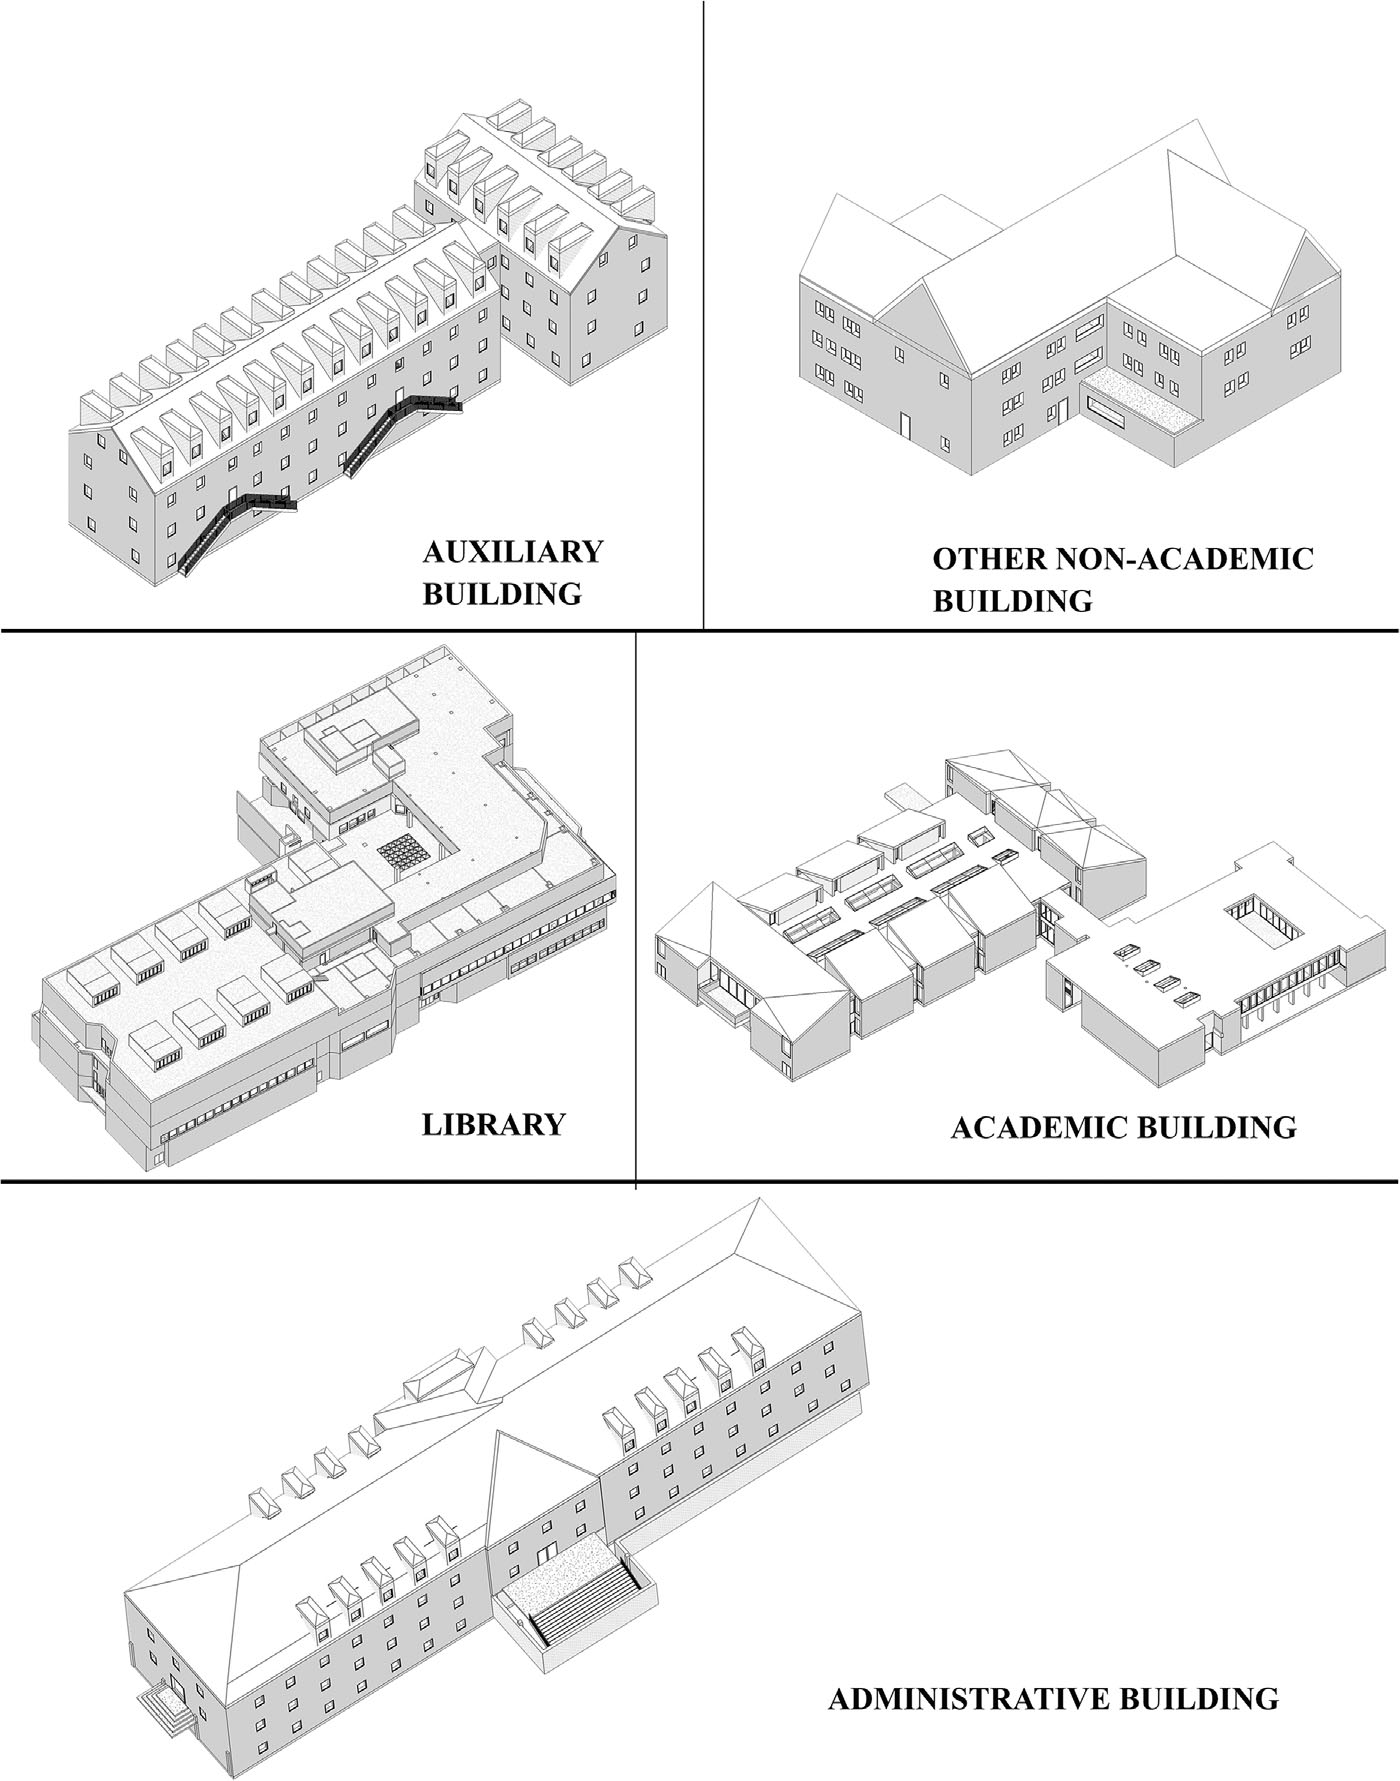 Prototype buildings (Autodesk Revit models) from original construction documents archived by the campus facility management office.